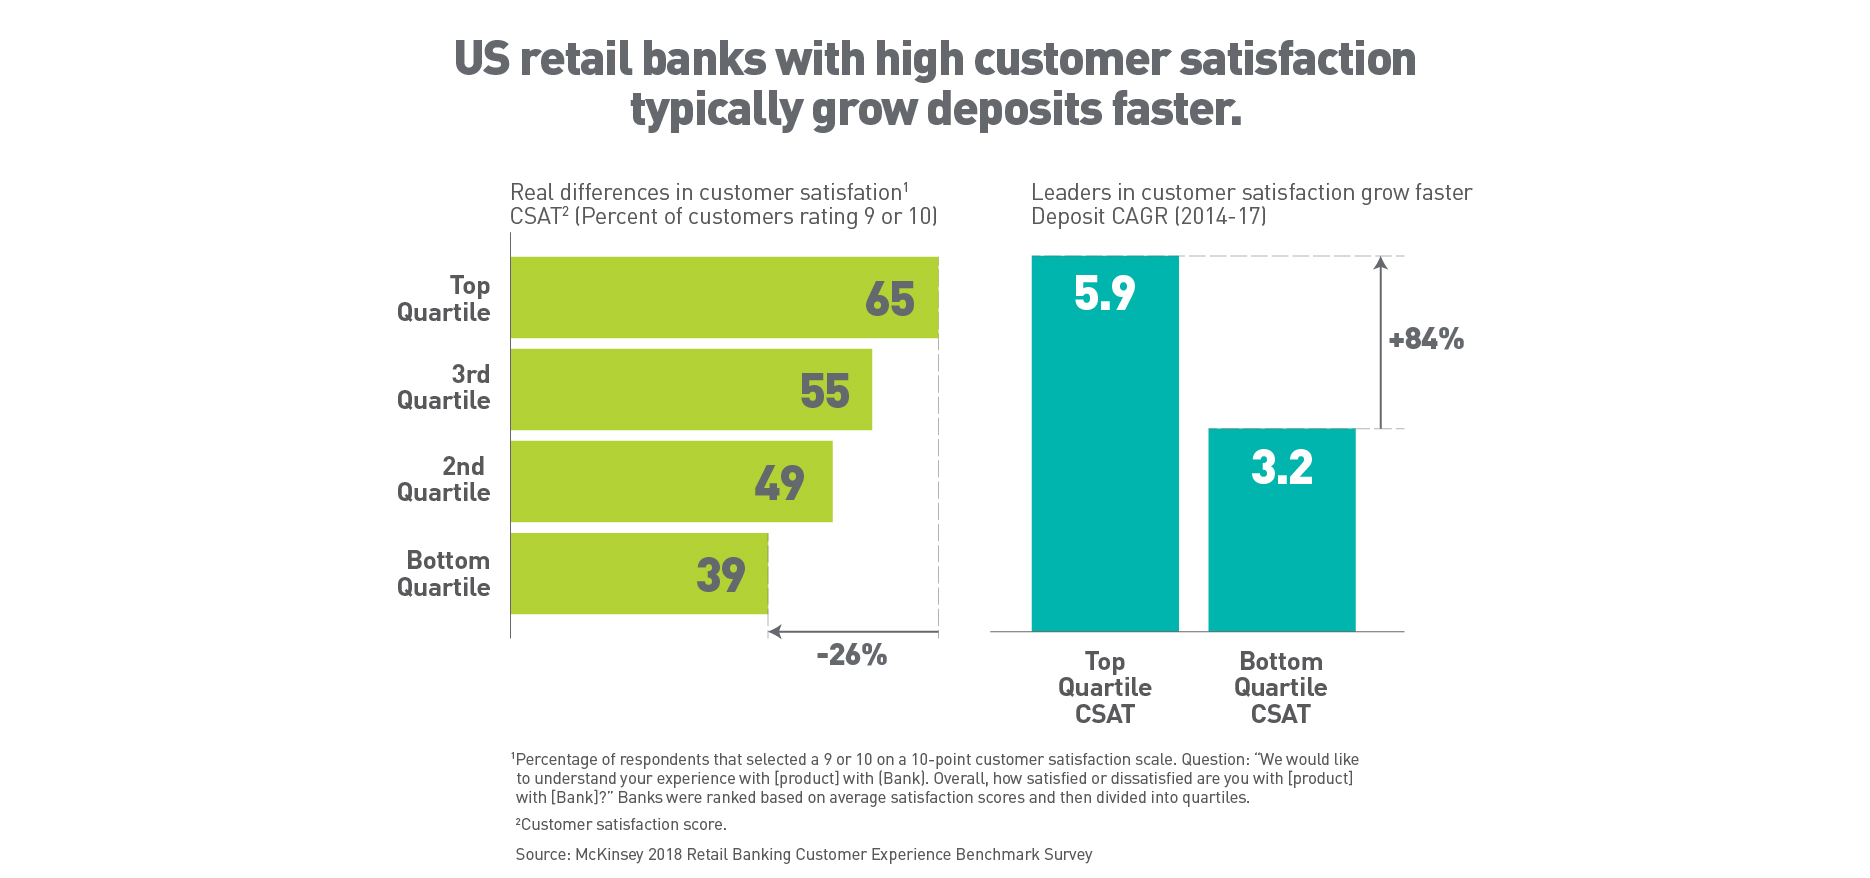 US retail banks with high customer satisfaction typically grow deposits faster